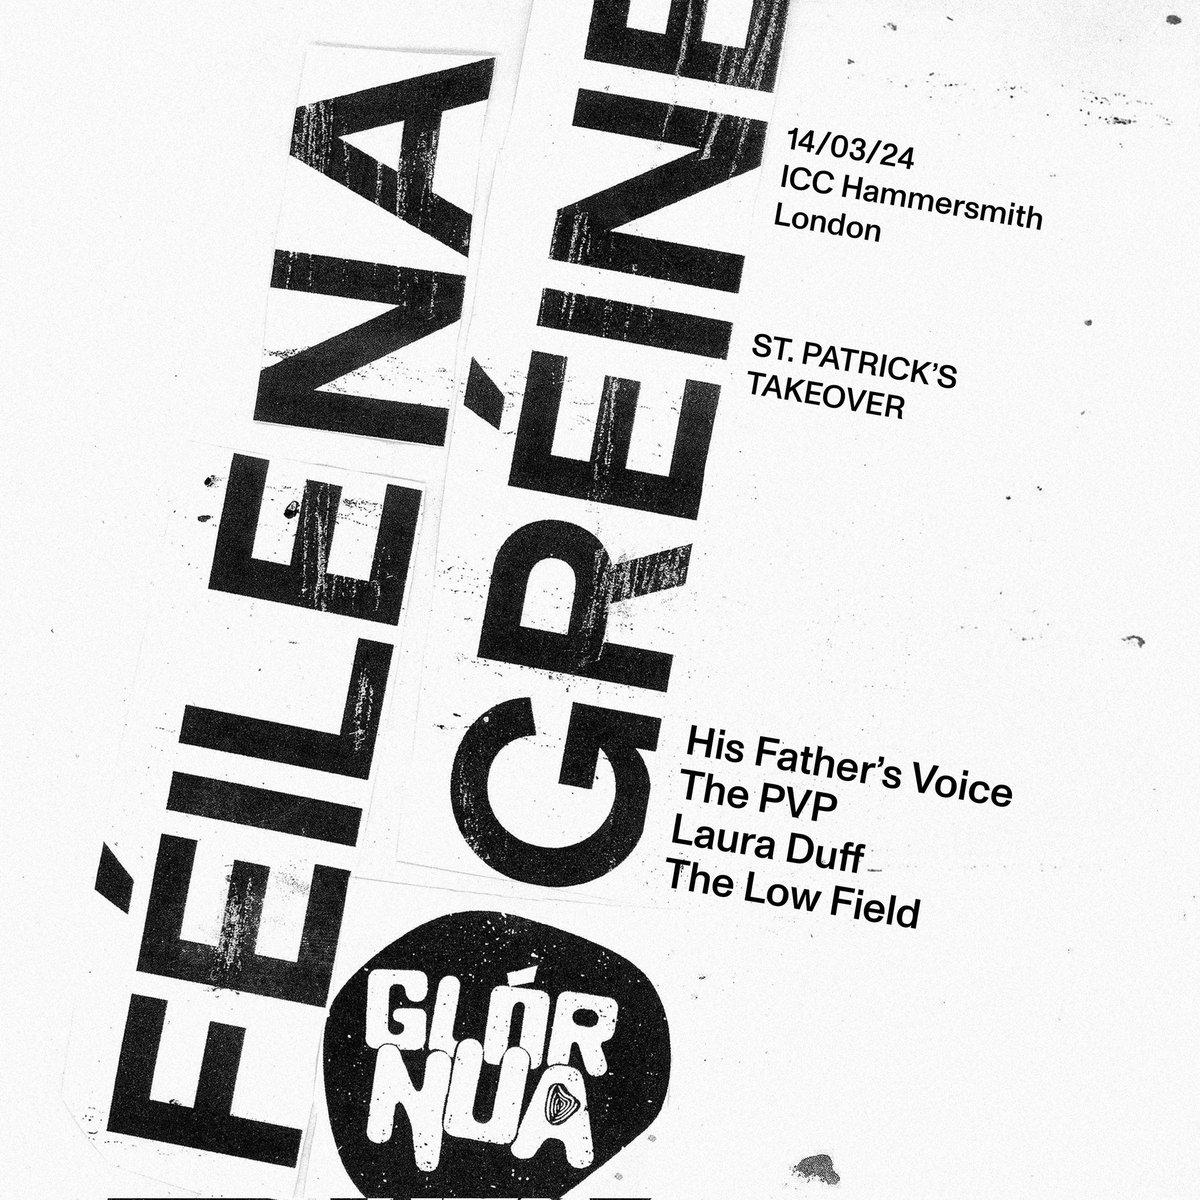 LONDON We're excited to announce a Féile na Gréine St. Patrick's takeover at the Irish Cultural Centre Hammersmith, on Thursday 14th March, featuring @HFV_LK @thelowfield @lauraduffmusic and @The_PVP_ Tickets on sale: irishculturalcentre.co.uk/event/glor-nua… Thanks @myicclondon for the support